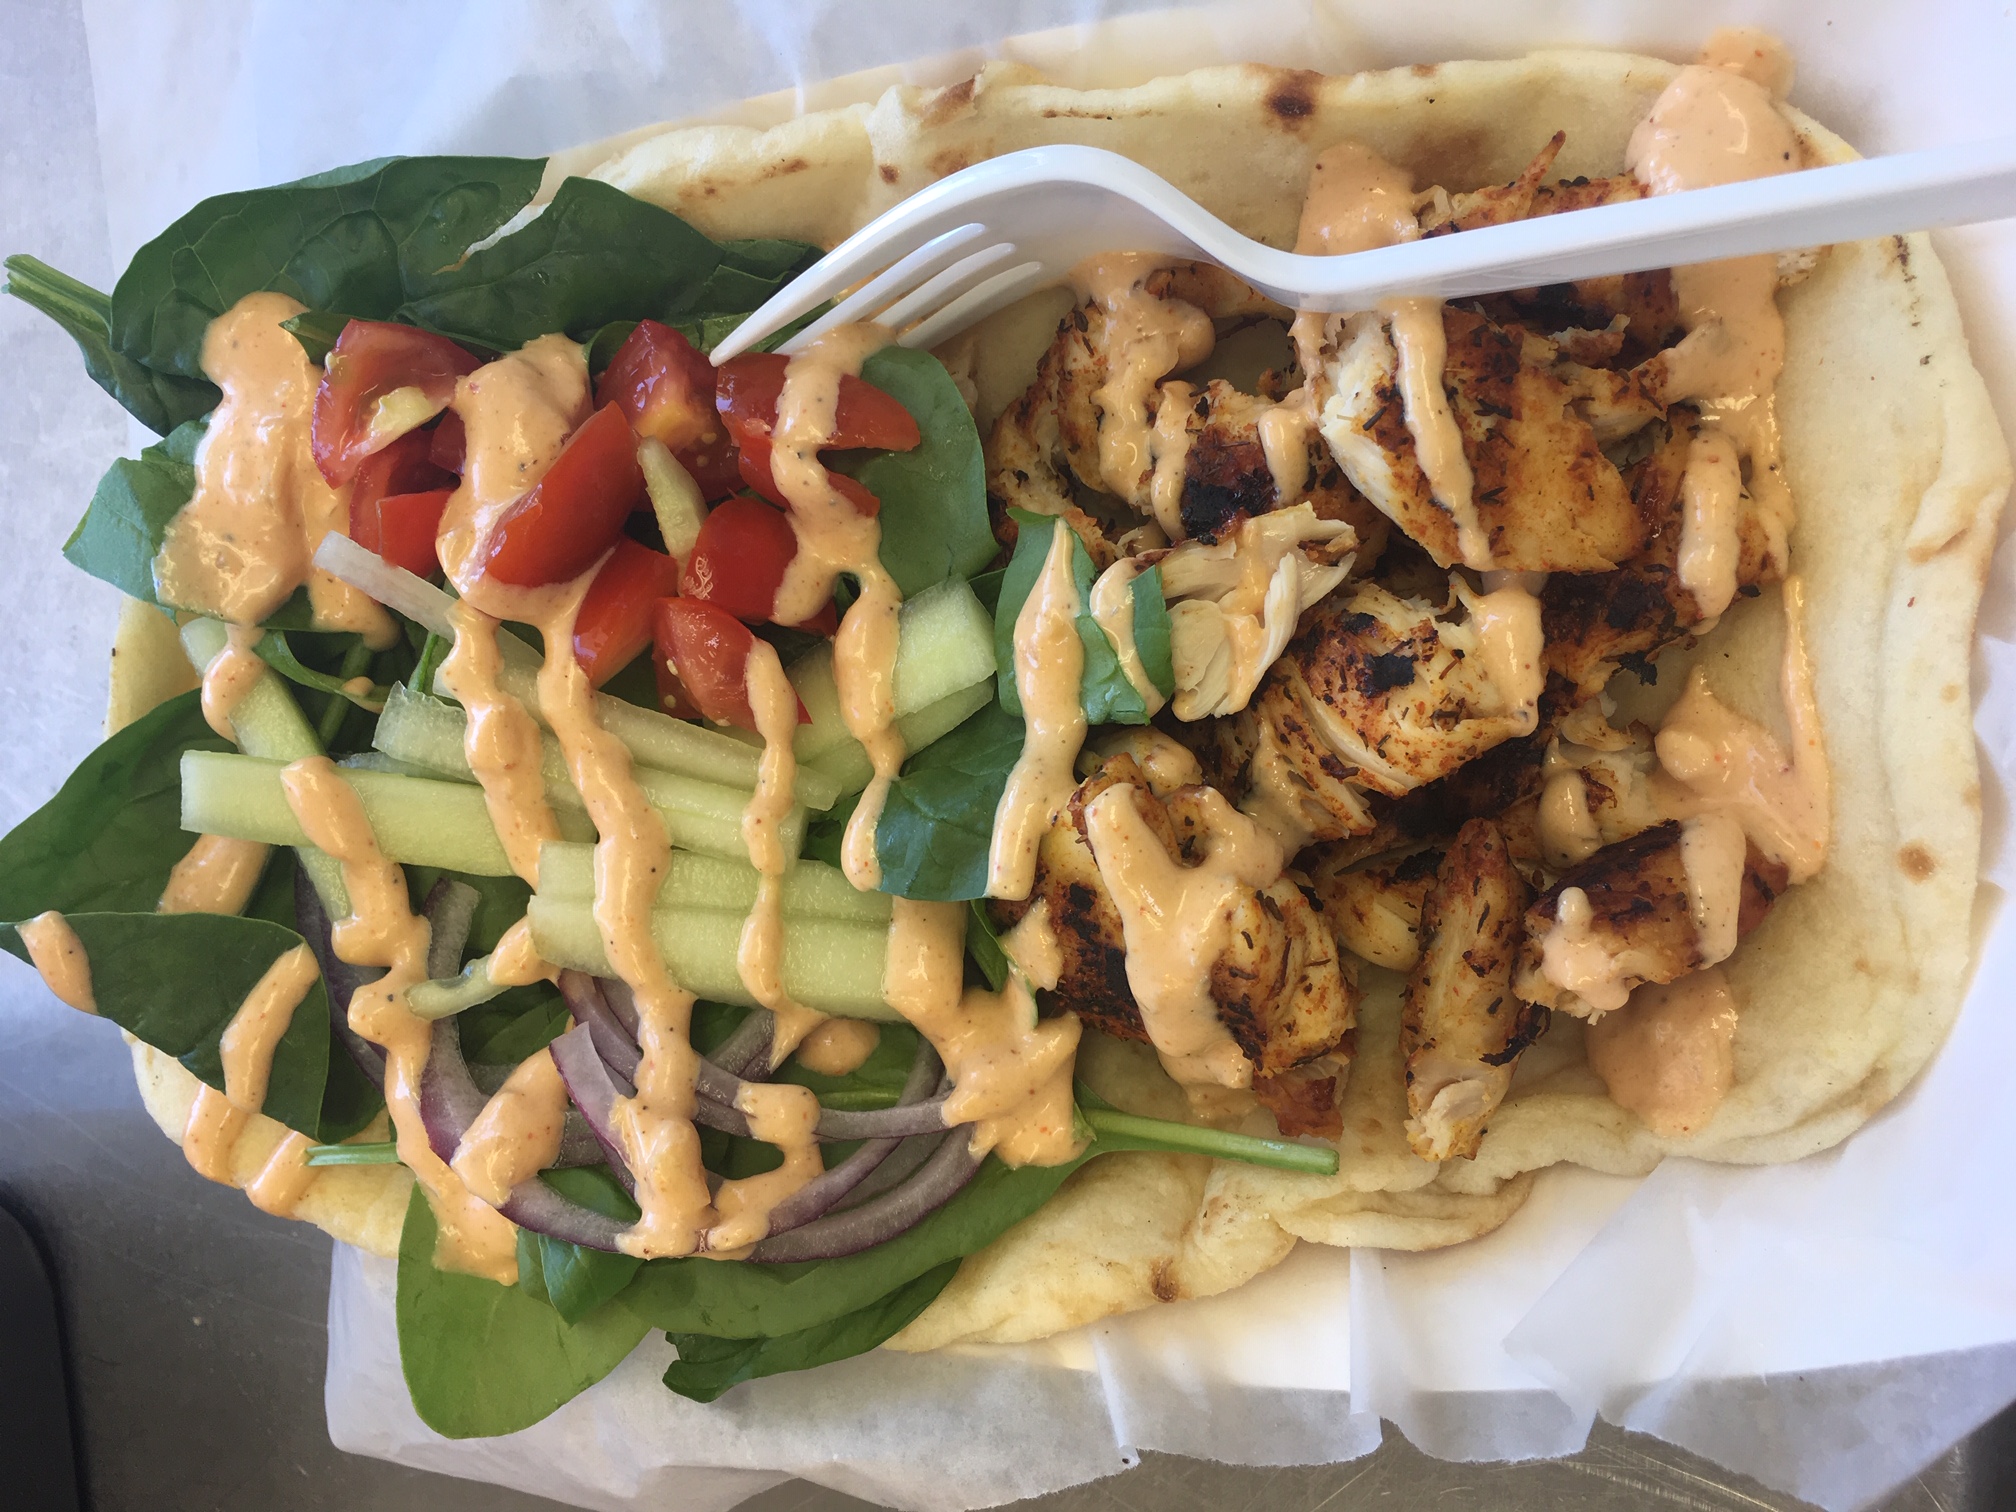 Gallery Images : Bessi Roo's Food Truck and Catering